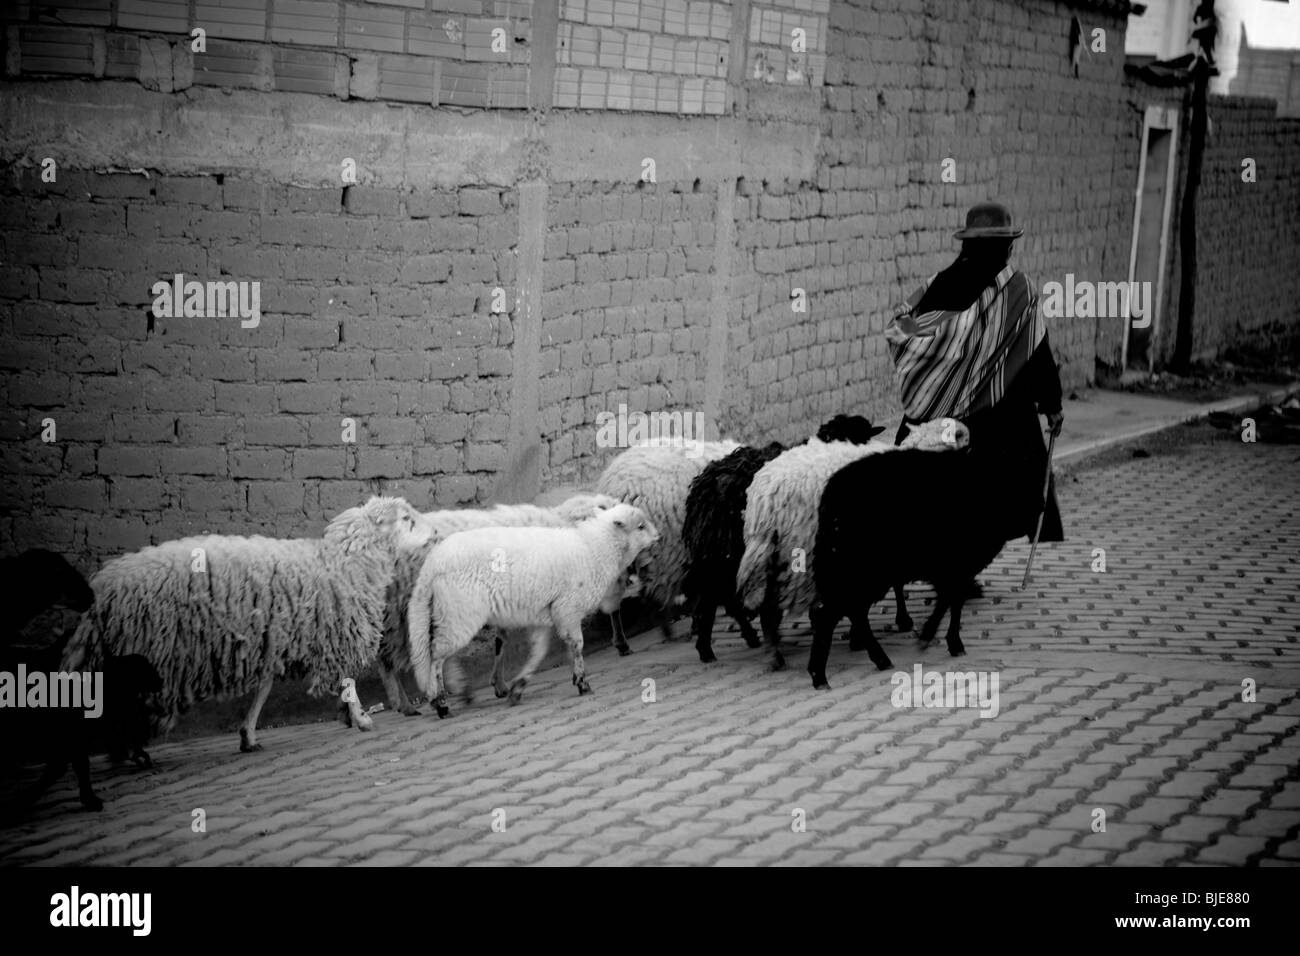 Shepherd walking and guarding sheep in a street of Copacabana, Titicaca Lake, Andes, Bolivia, South America Stock Photo